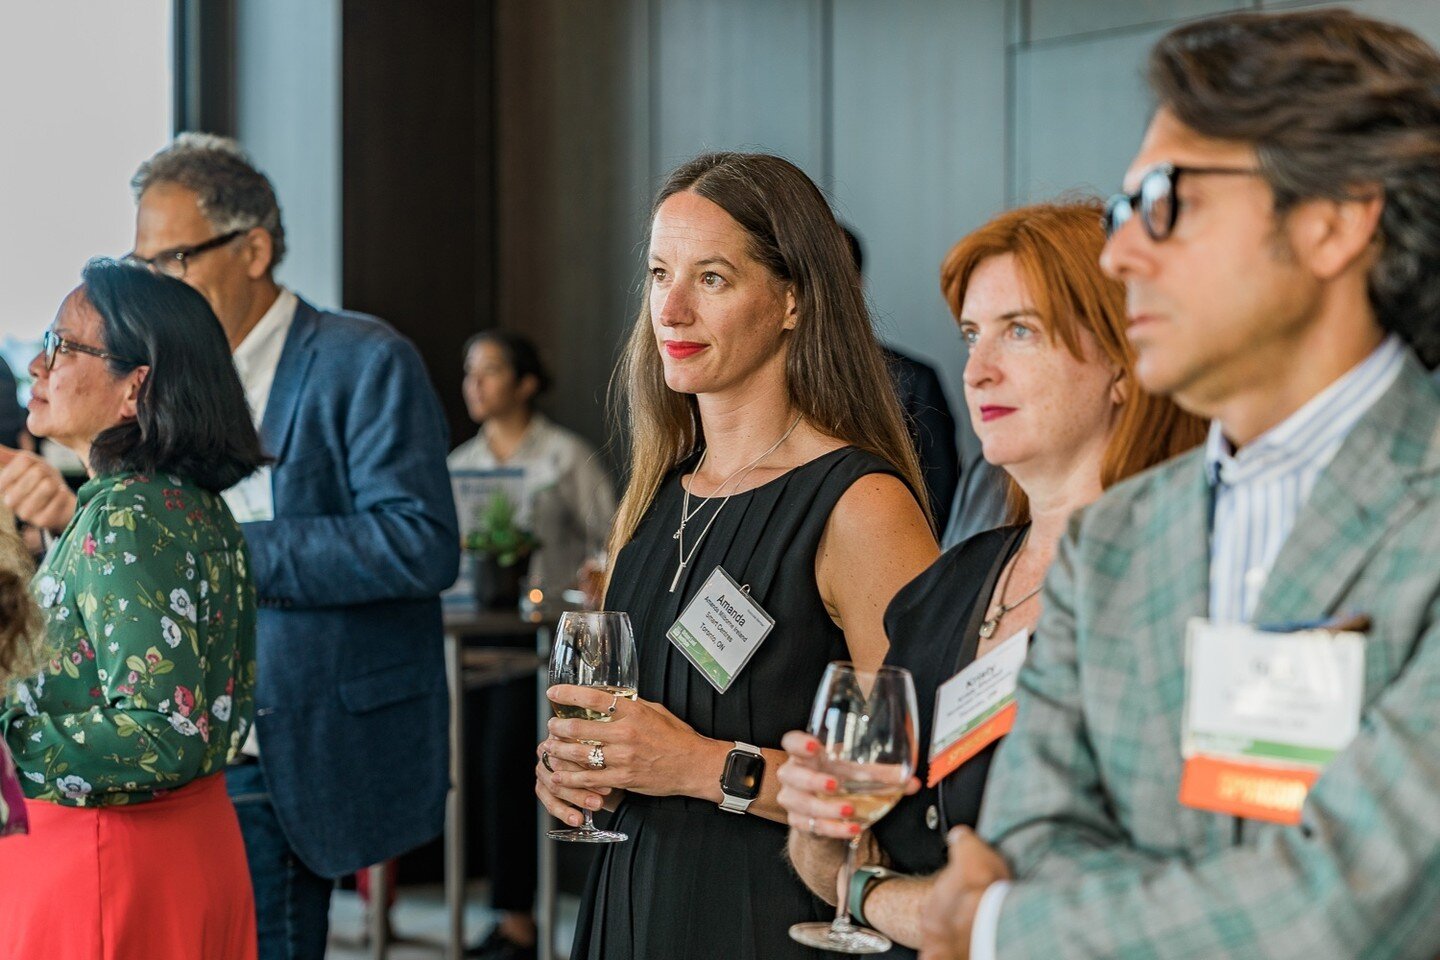 Only a few more days until ULI Spring Meeting kicks off in Toronto! 🌟 Connect with like-minded professionals, discover the latest industry insights, and engage in thought-provoking discussions on infrastructure, technology, housing, and more. Get in